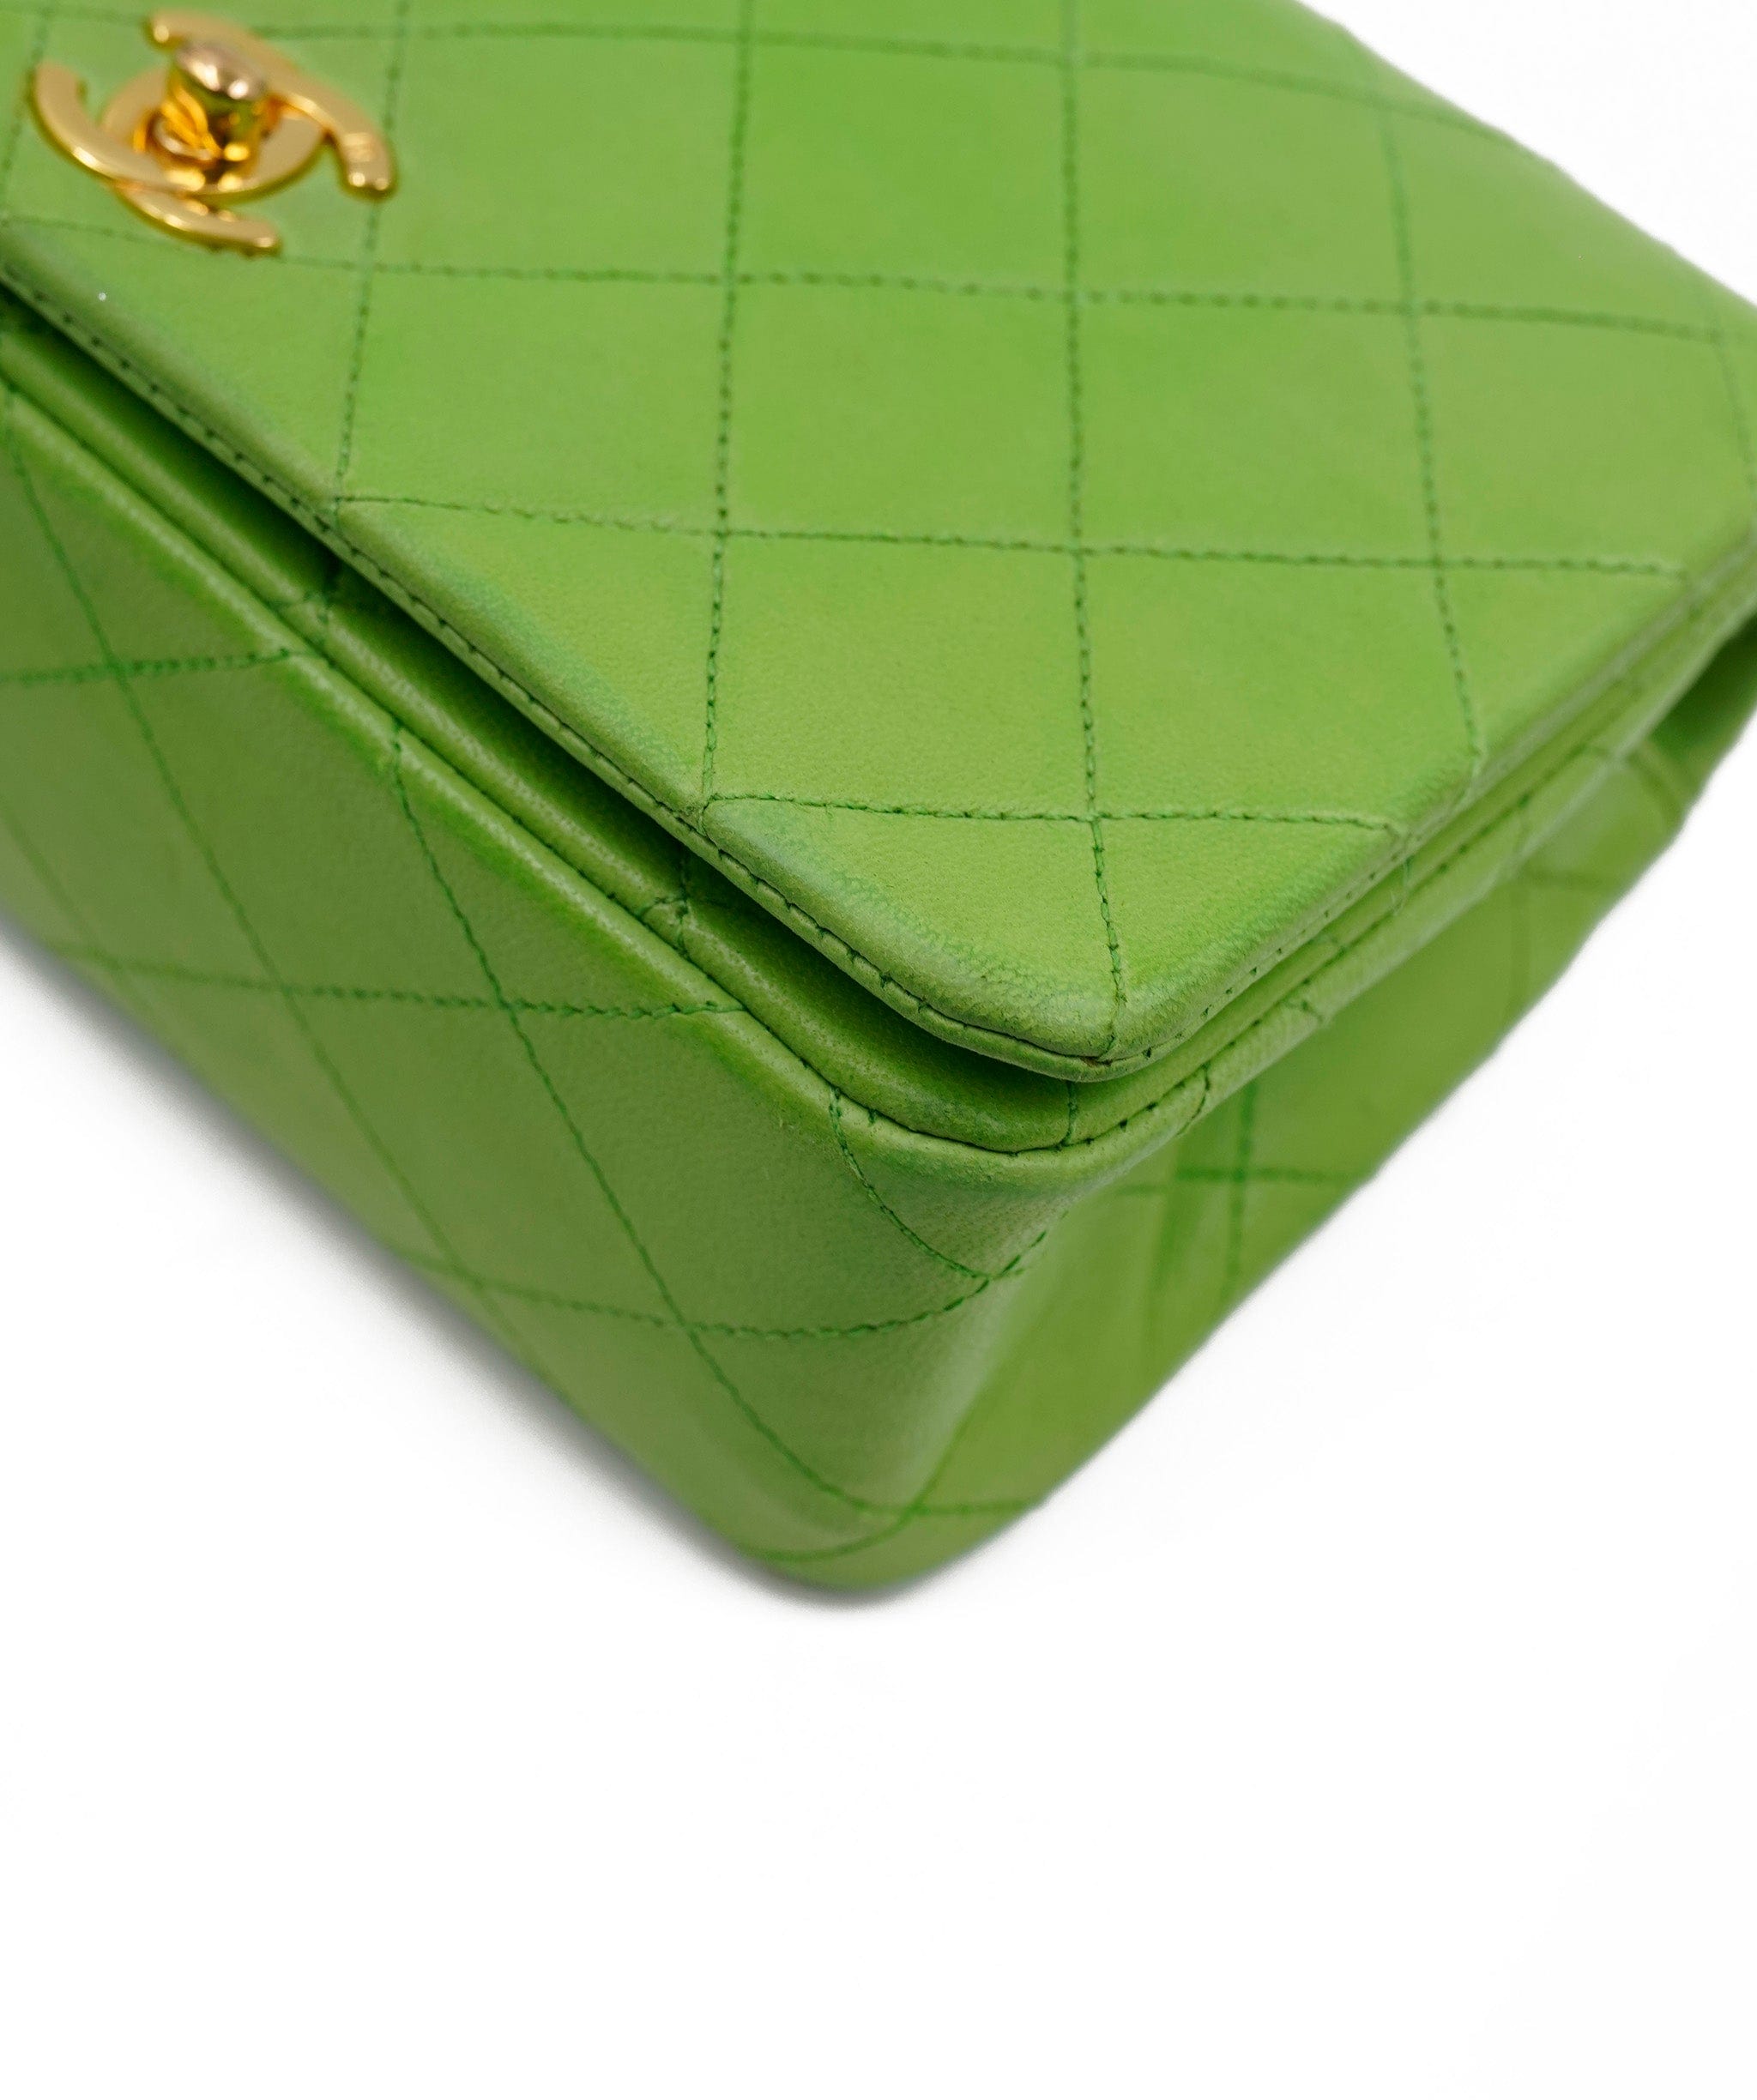 Chanel Chanel 7" Full Flap in Green Lambskin with GHW - AWL4075